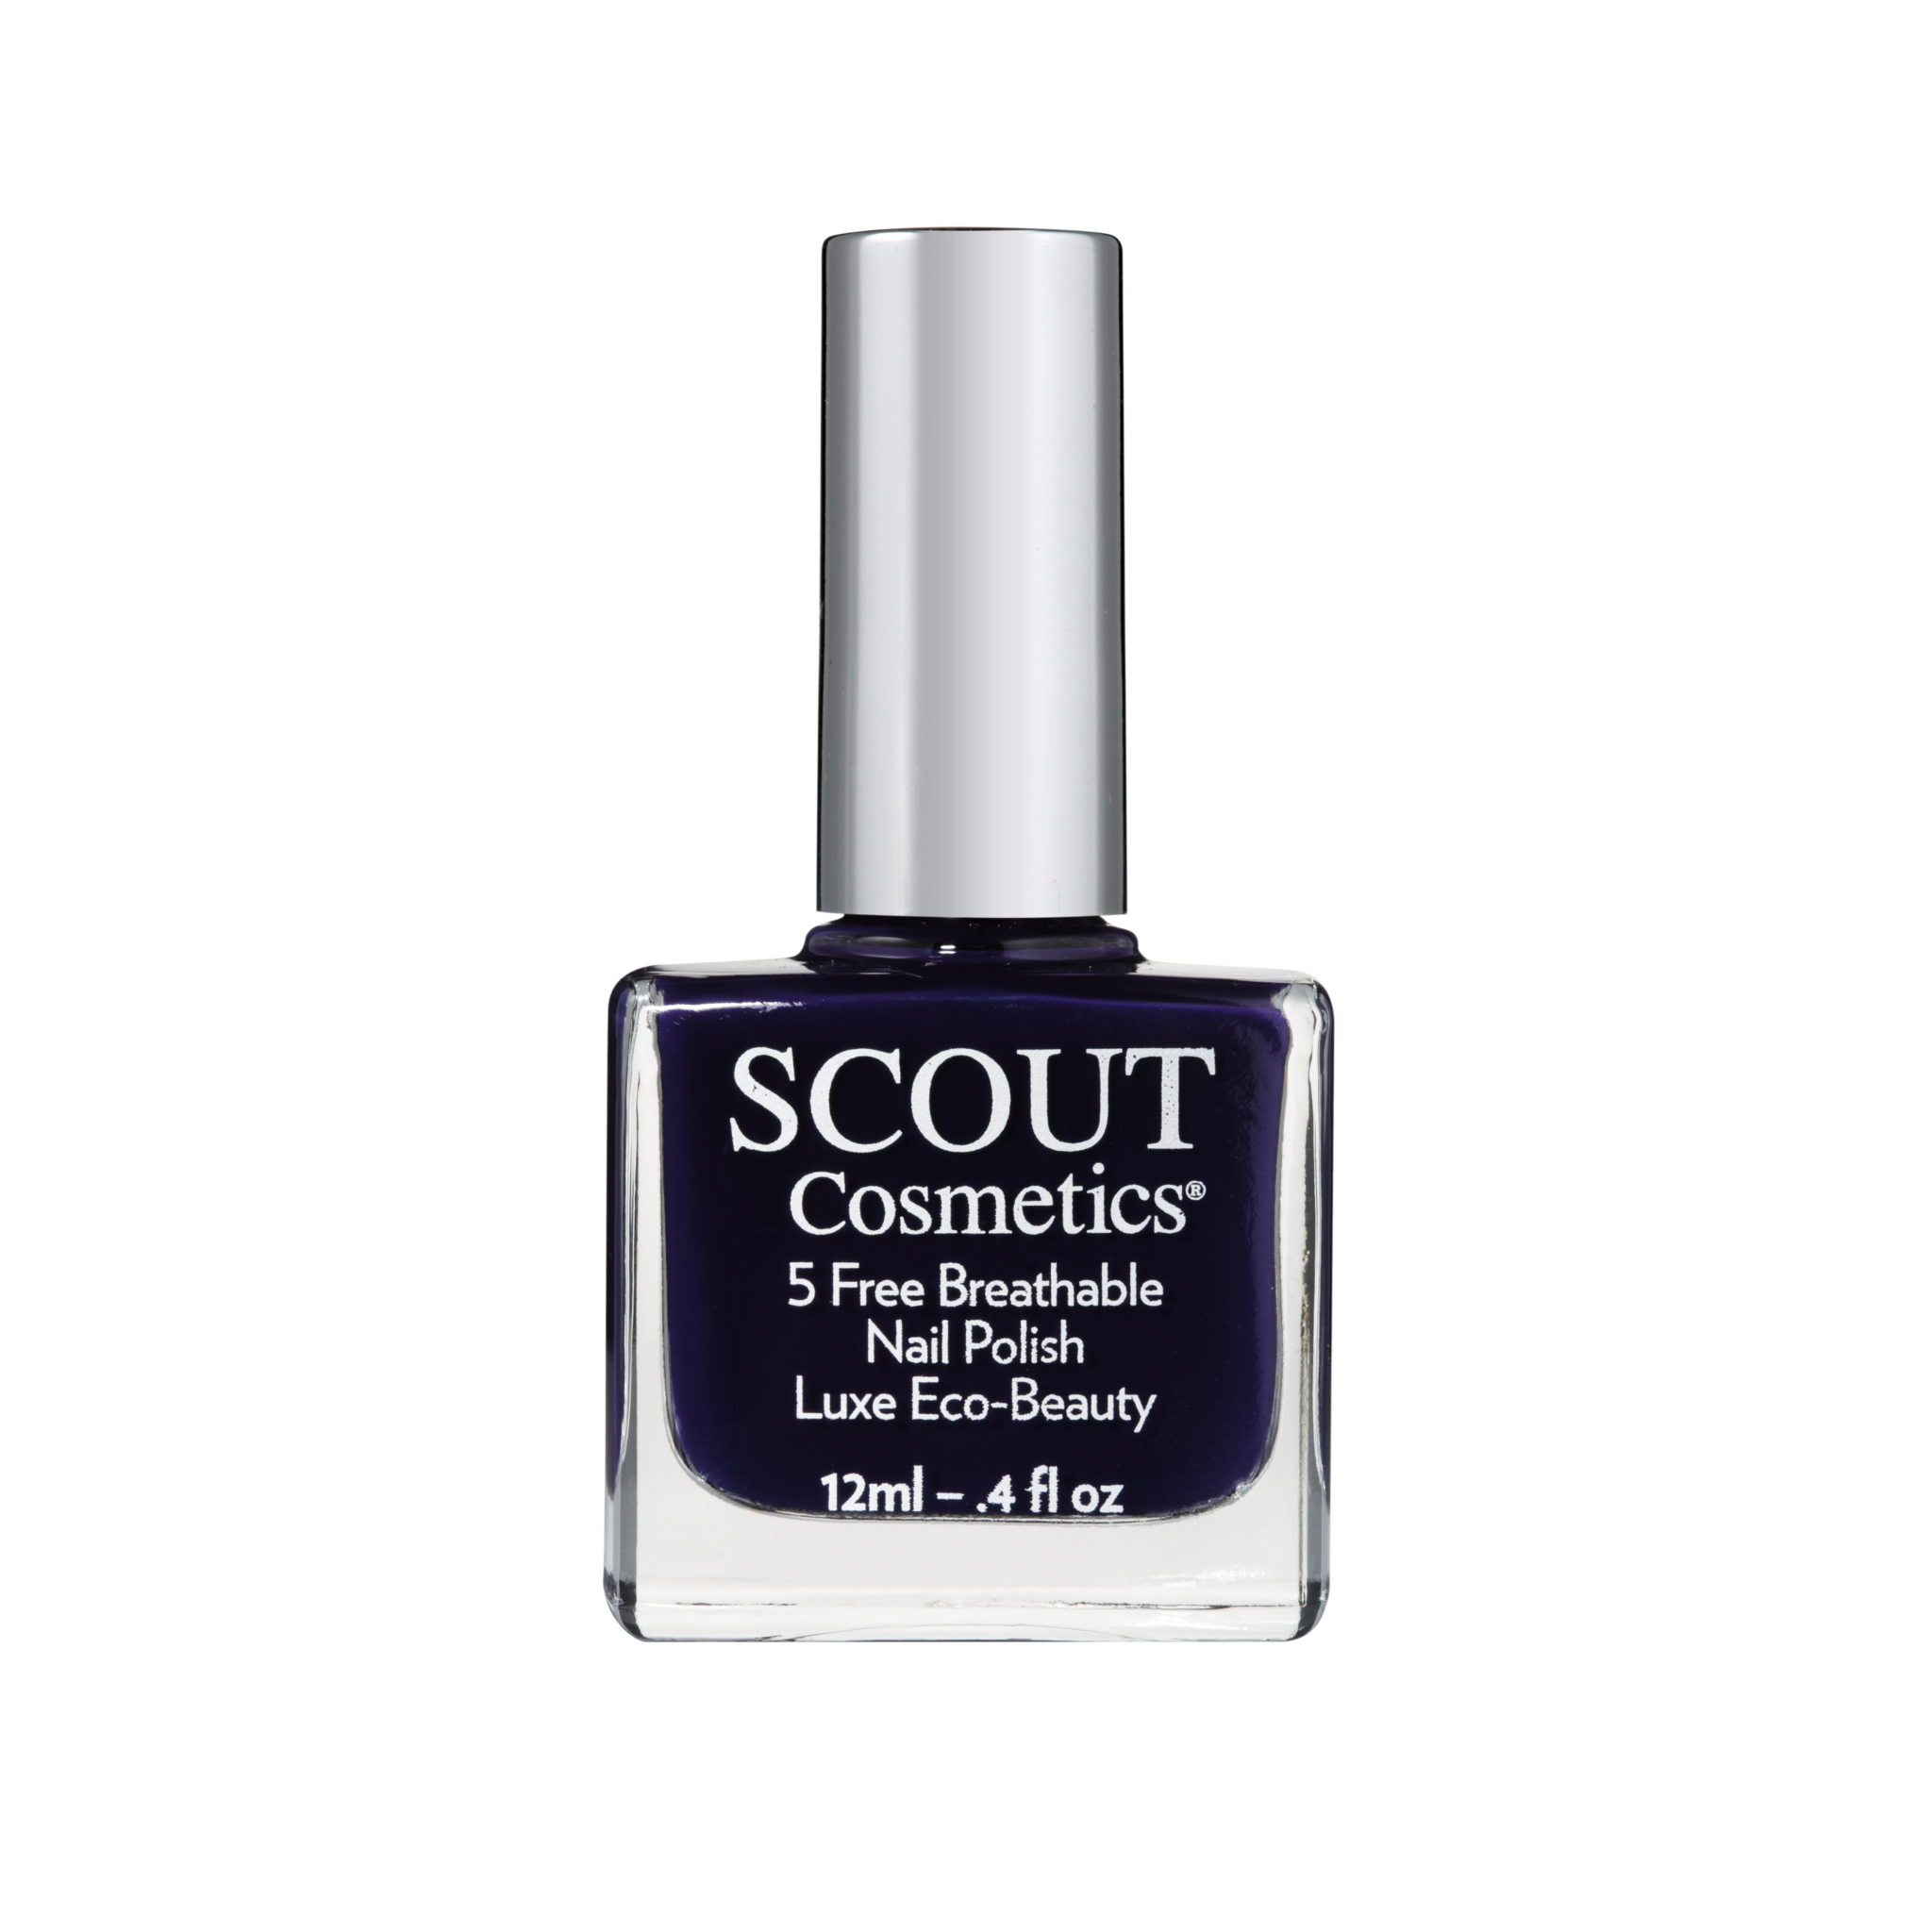 SCOUT Cosmetics Nail Polish - Surrender Yourself